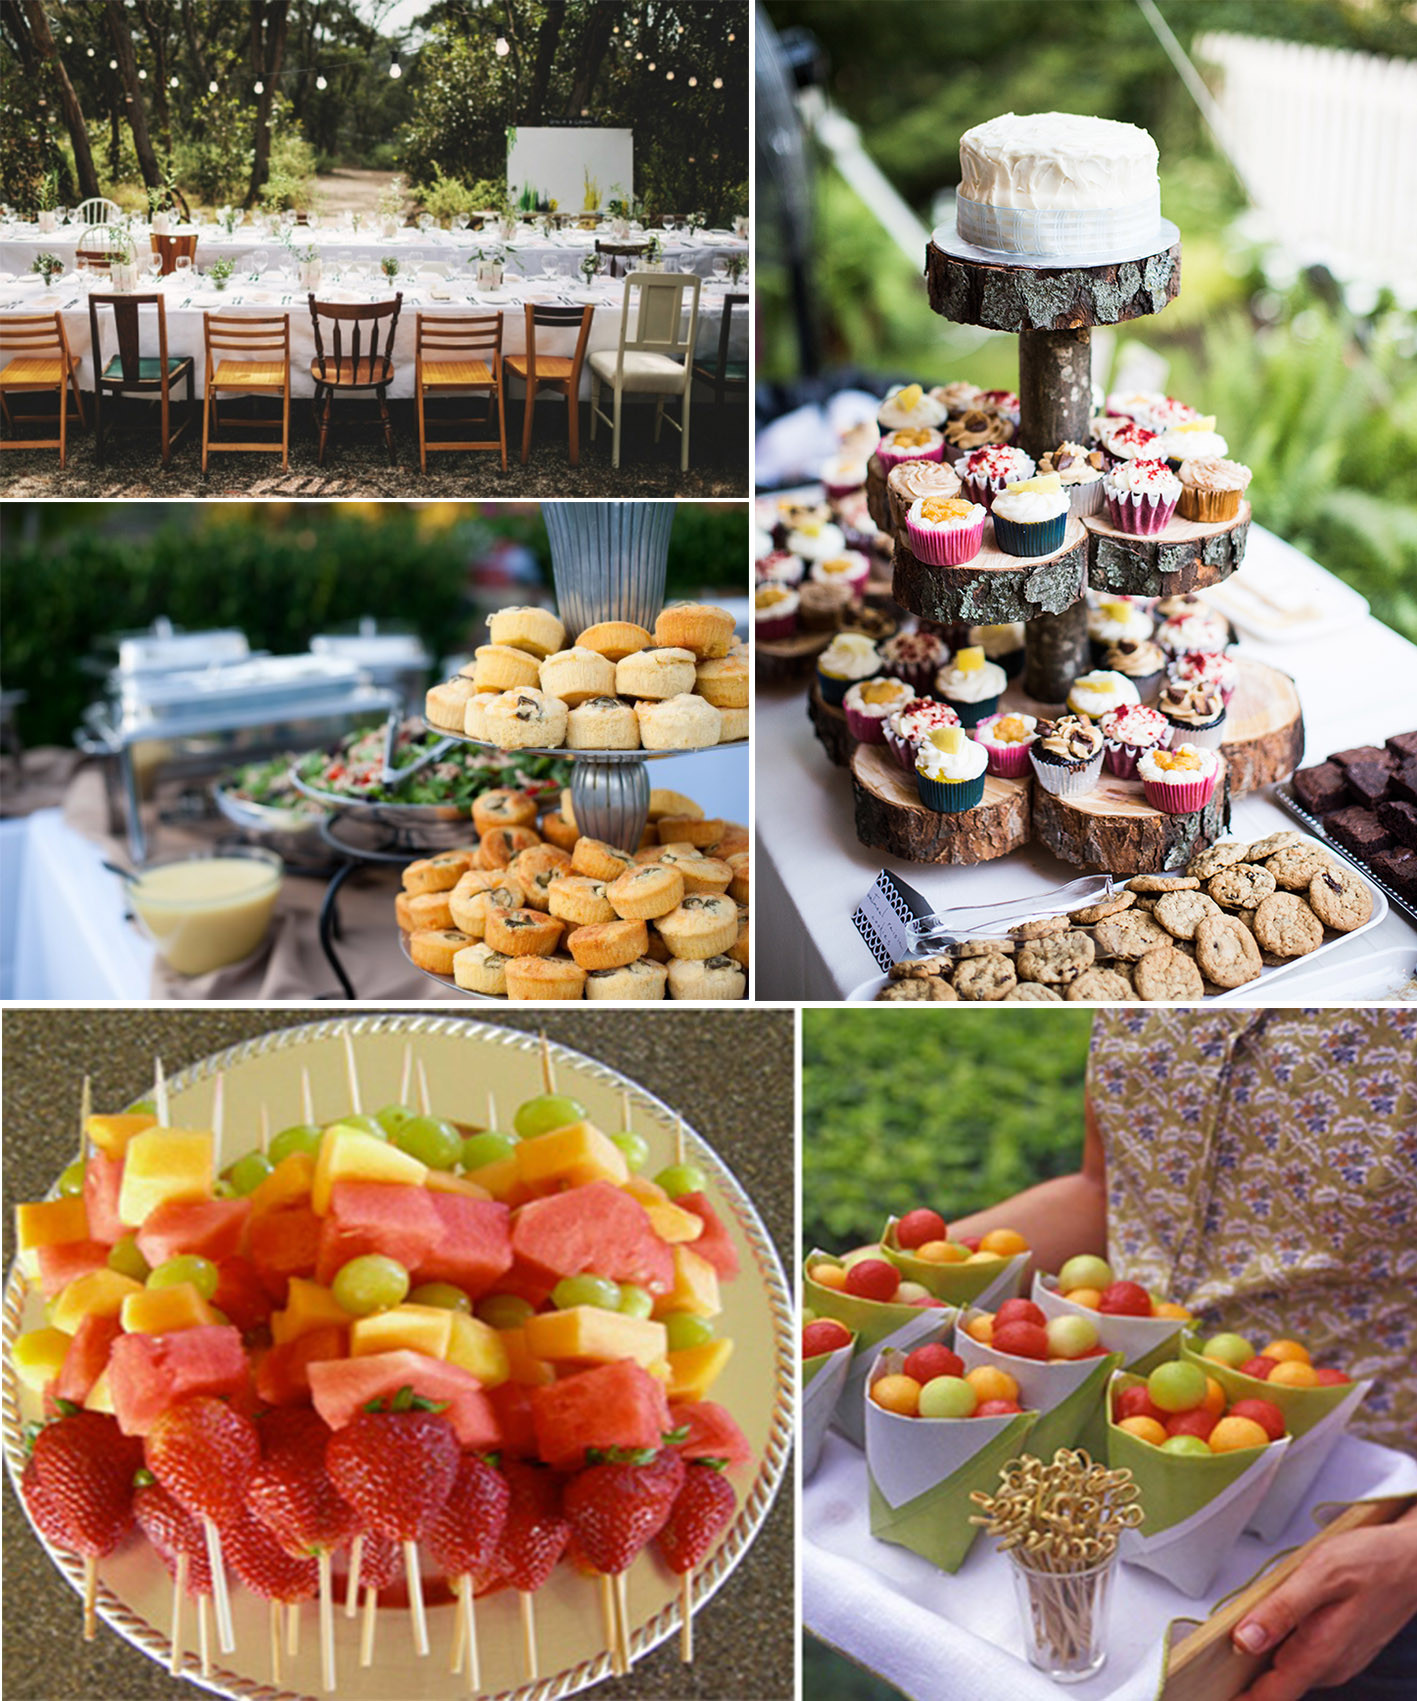 Aengagement Party Food Ideas
 How to play a backyard themed wedding – lianggeyuan123